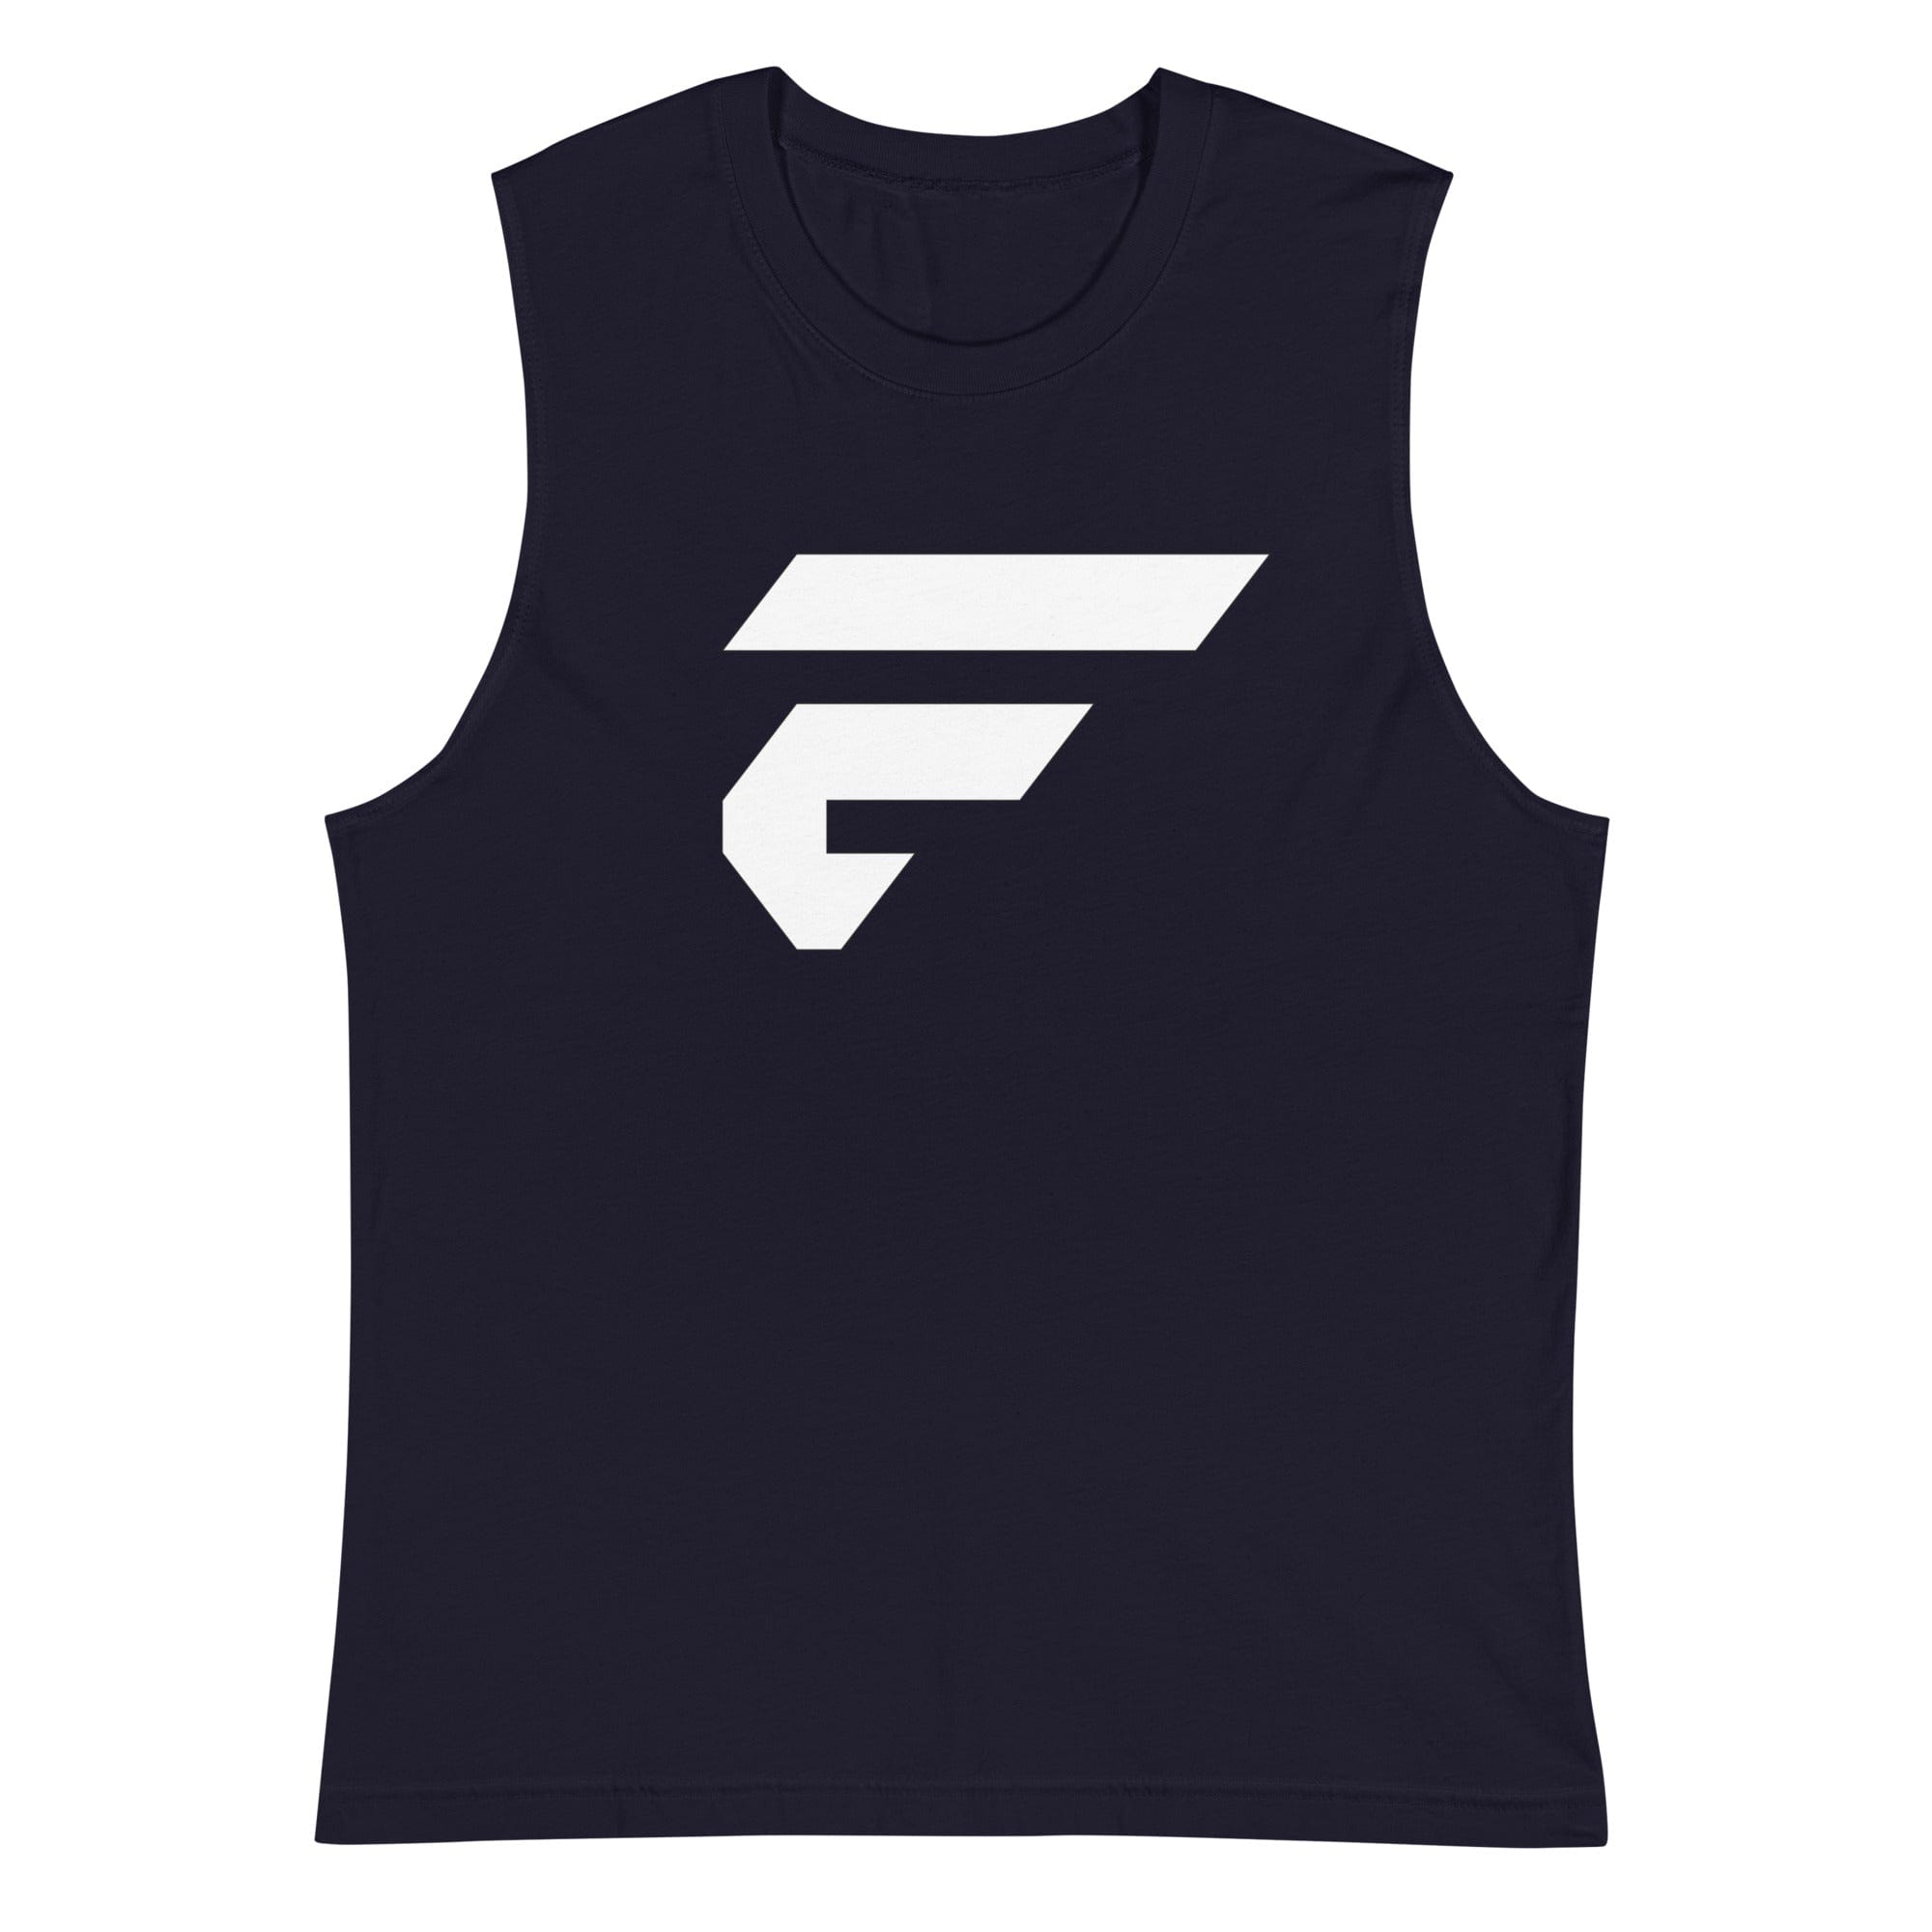 Men's navy muscle shirt with Fire Cornhole F logo in white